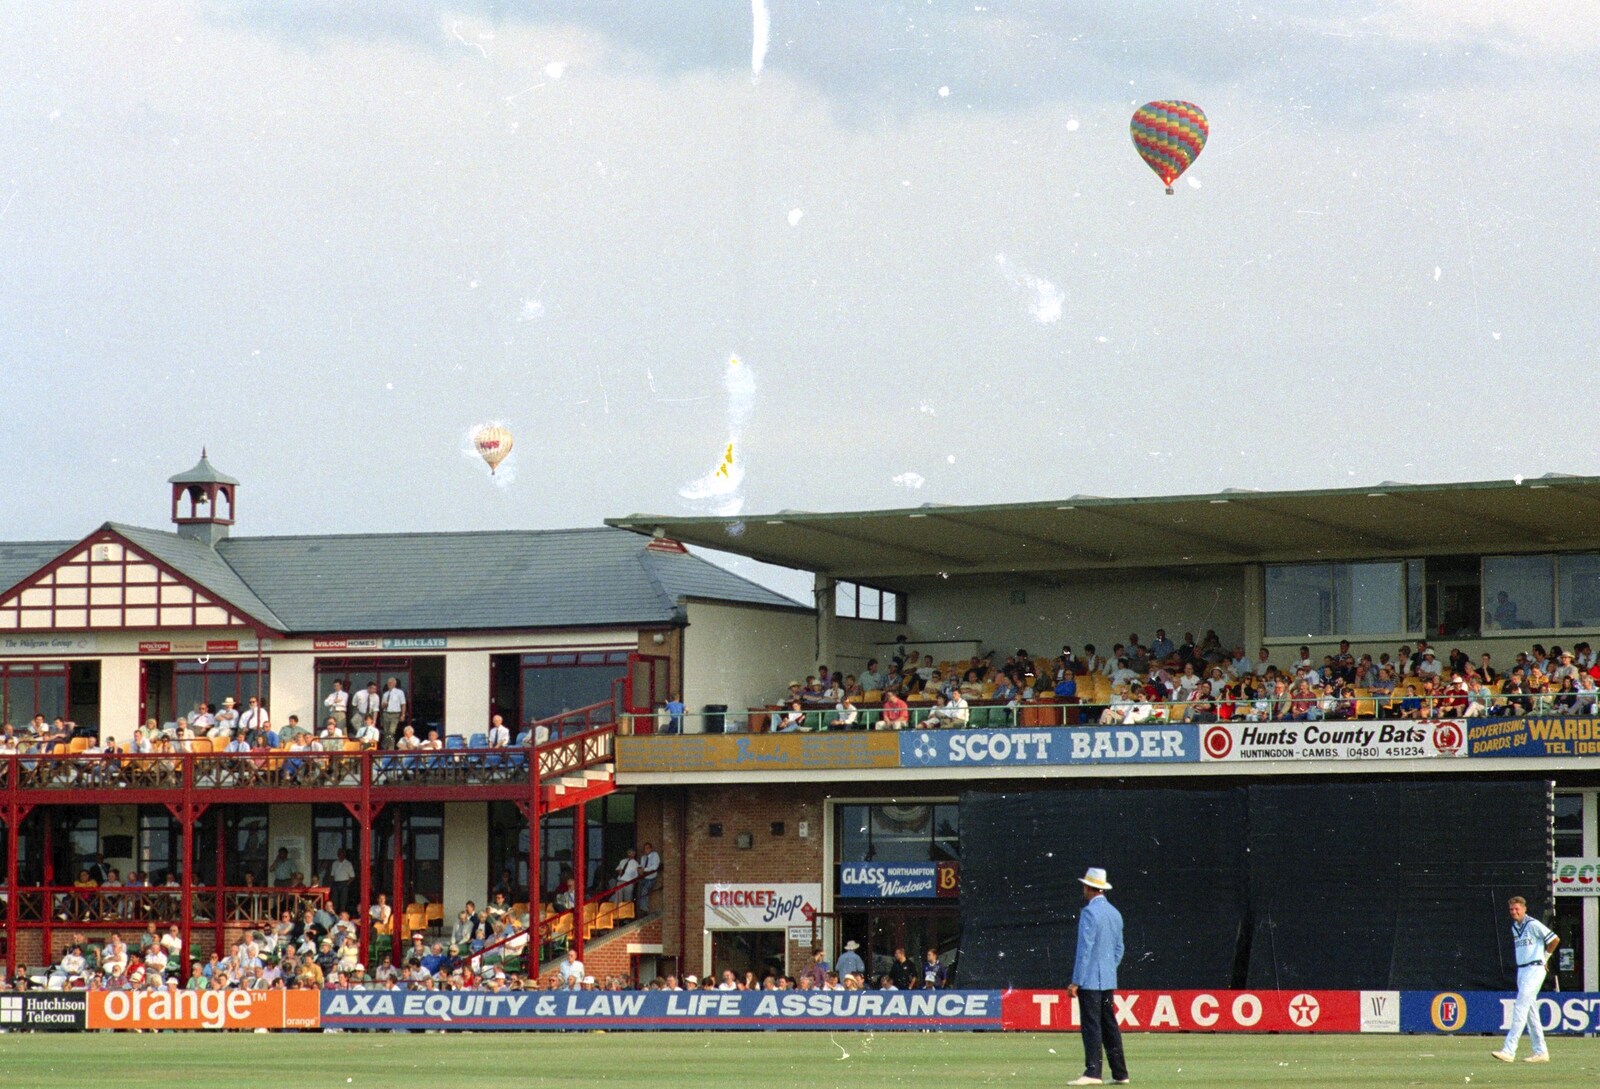 A Spot of Cricket, Northampton - 5th September 1994: A couple of balloons float over